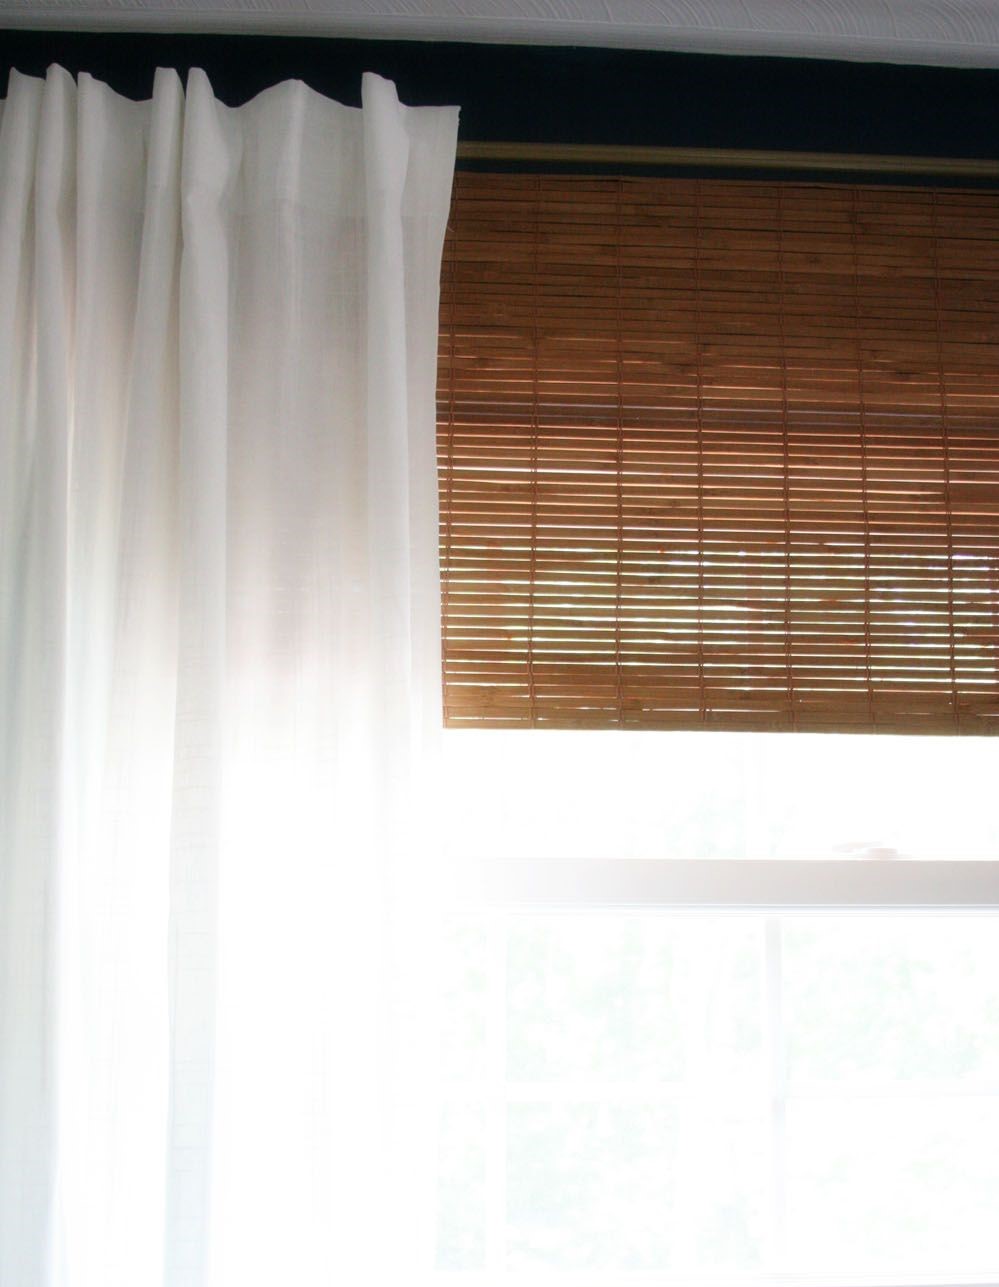 Install a Tropical Blind Curtain for The Window